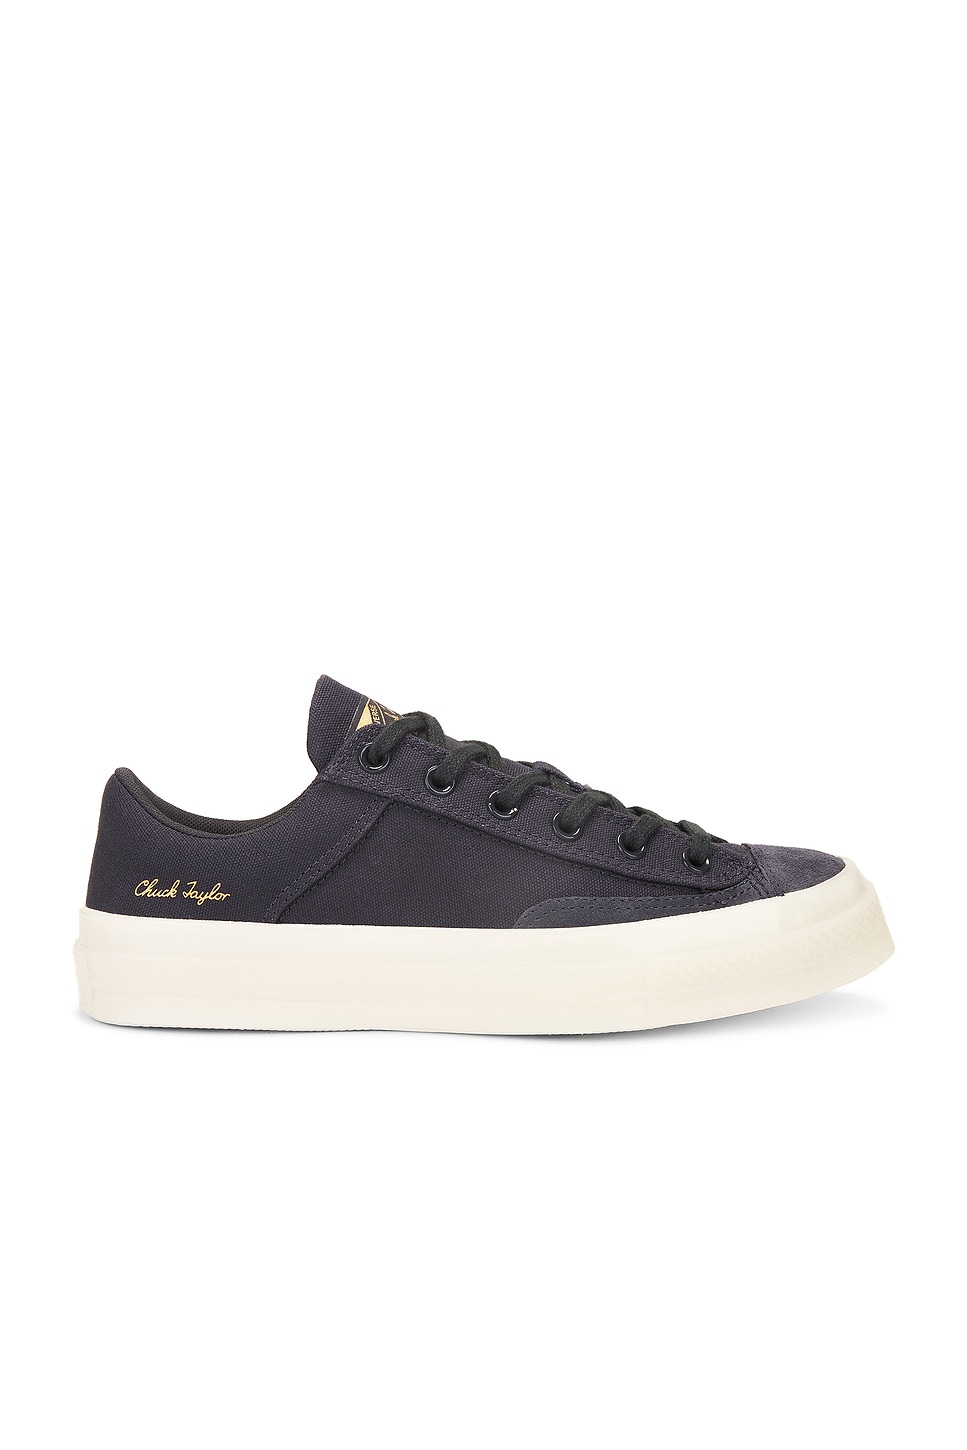 Image 1 of Converse Chuck 70 Marquis in Nightfall Grey, Gold, & Vintage White